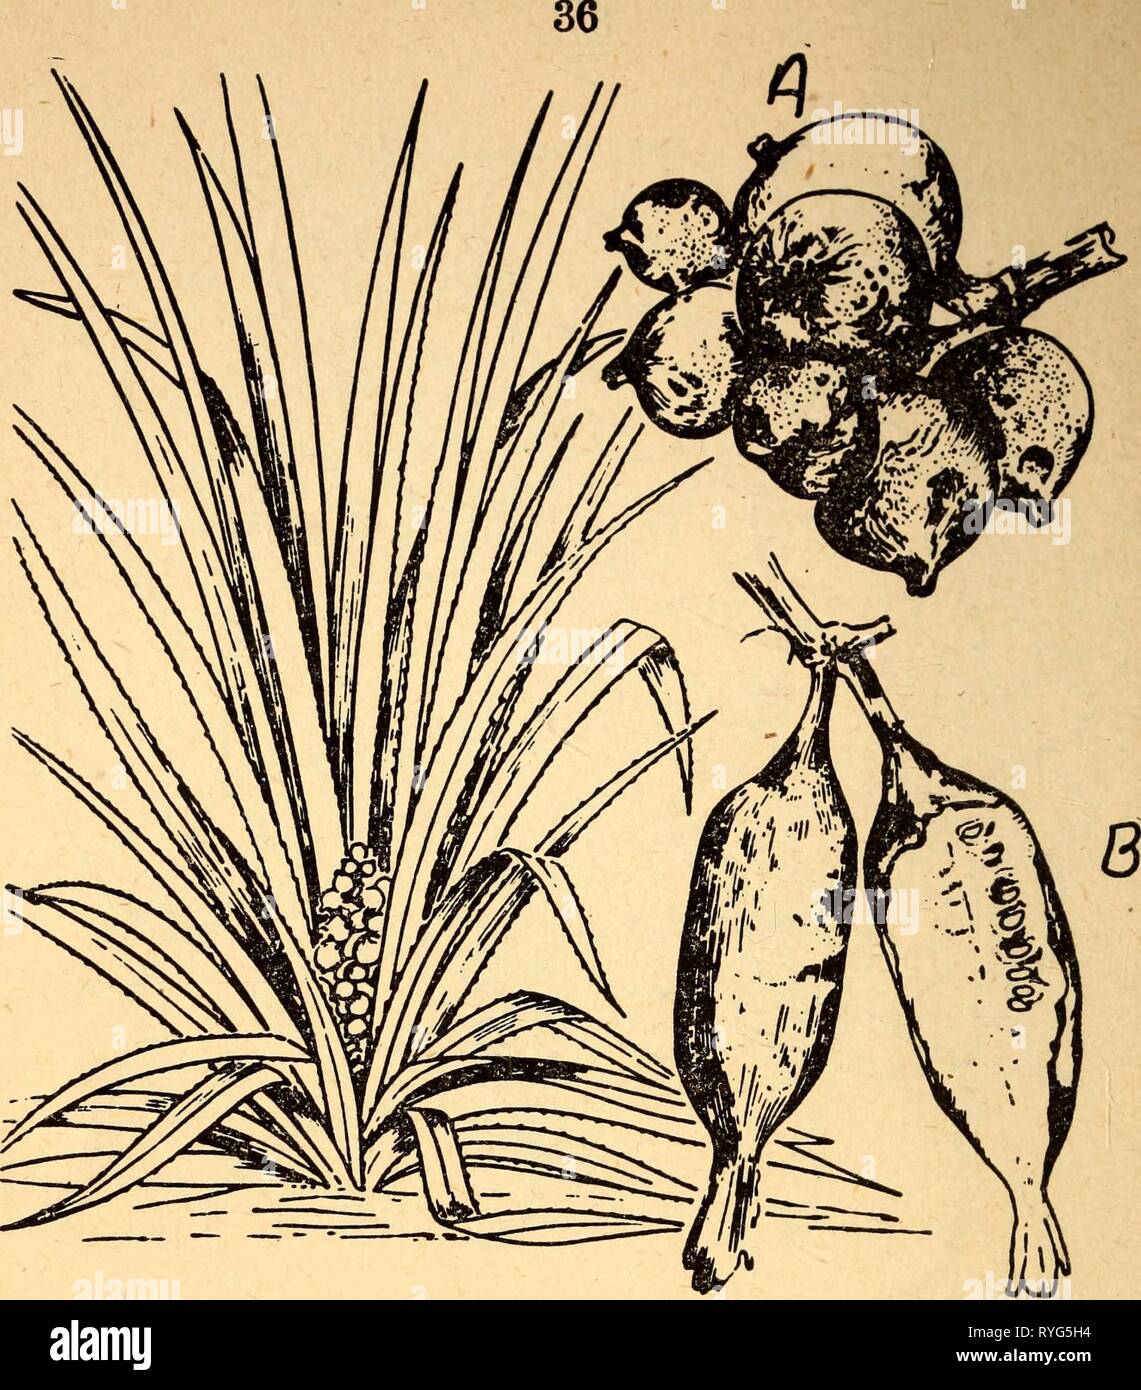 Edible and poisonous plants of the Caribbean region  ediblepoisonousp00dahl Year: 1944    27. A—PlNGWING Bromelia Pinguin B—PlRO Bromelia Karatas The sour pingwing may be eaten raw or cooked. It is used to prepare a tart beverage similar to lemonade. The very young, tender leaves or sprouts or the center of the plant may be cooked as greens. Pingwing is a common wild plant of the Caribbean lowlands, growing abundantly in thickets and hedges. This fruit is similar to the cultivated pineapple; its leaves are spiny and the ripe fruits are yellow or red. Other names for it are pinuela, muta, and p Stock Photo